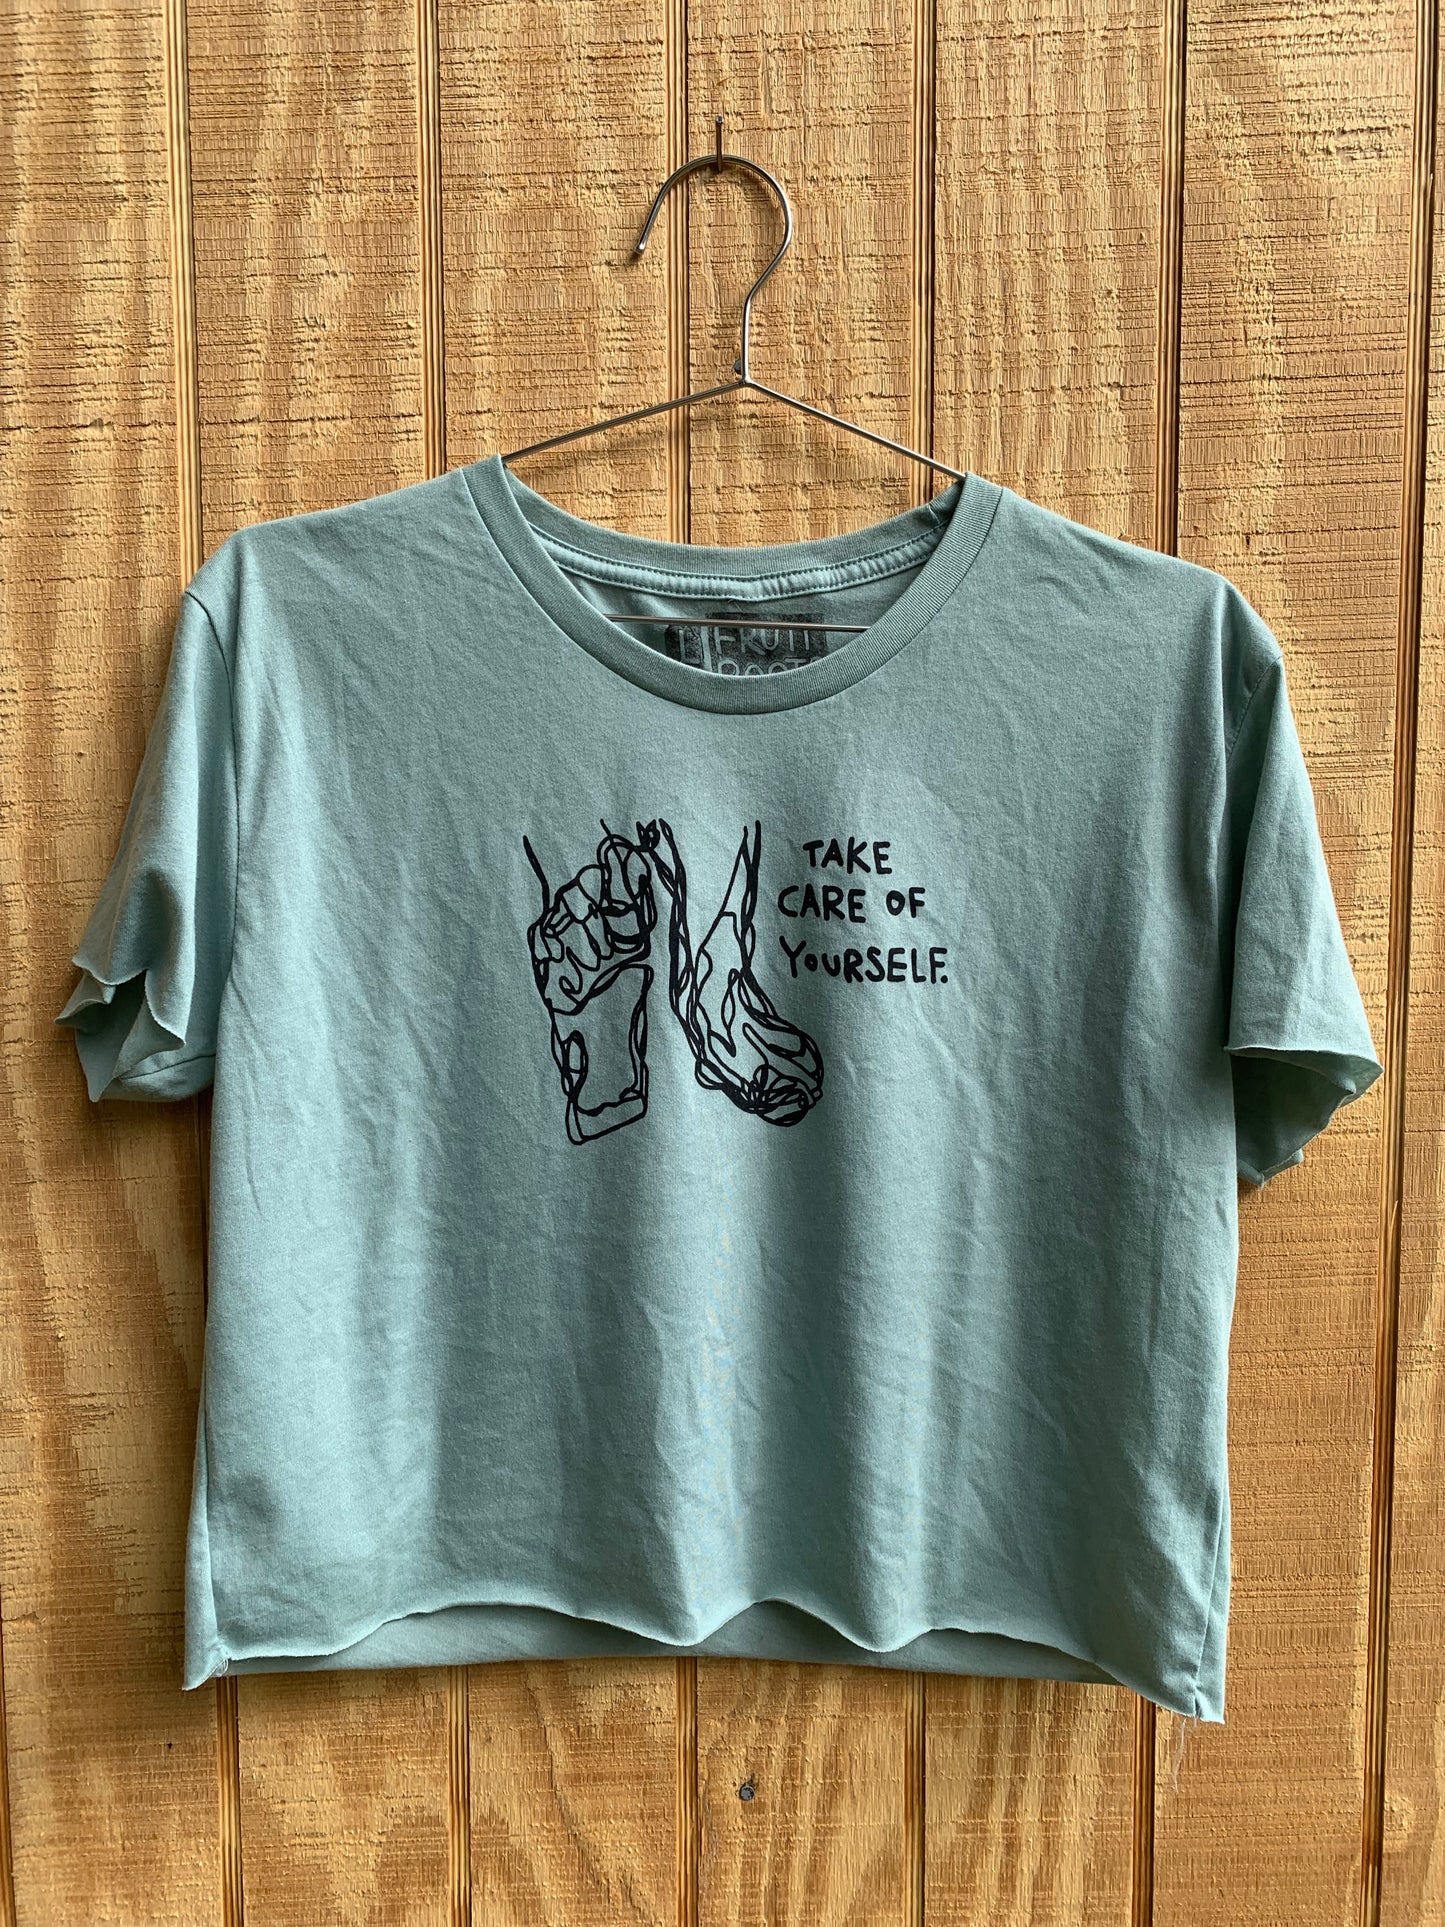 Teal crop top with black blind contour drawing of feet and black text that reads "take care of yourself"